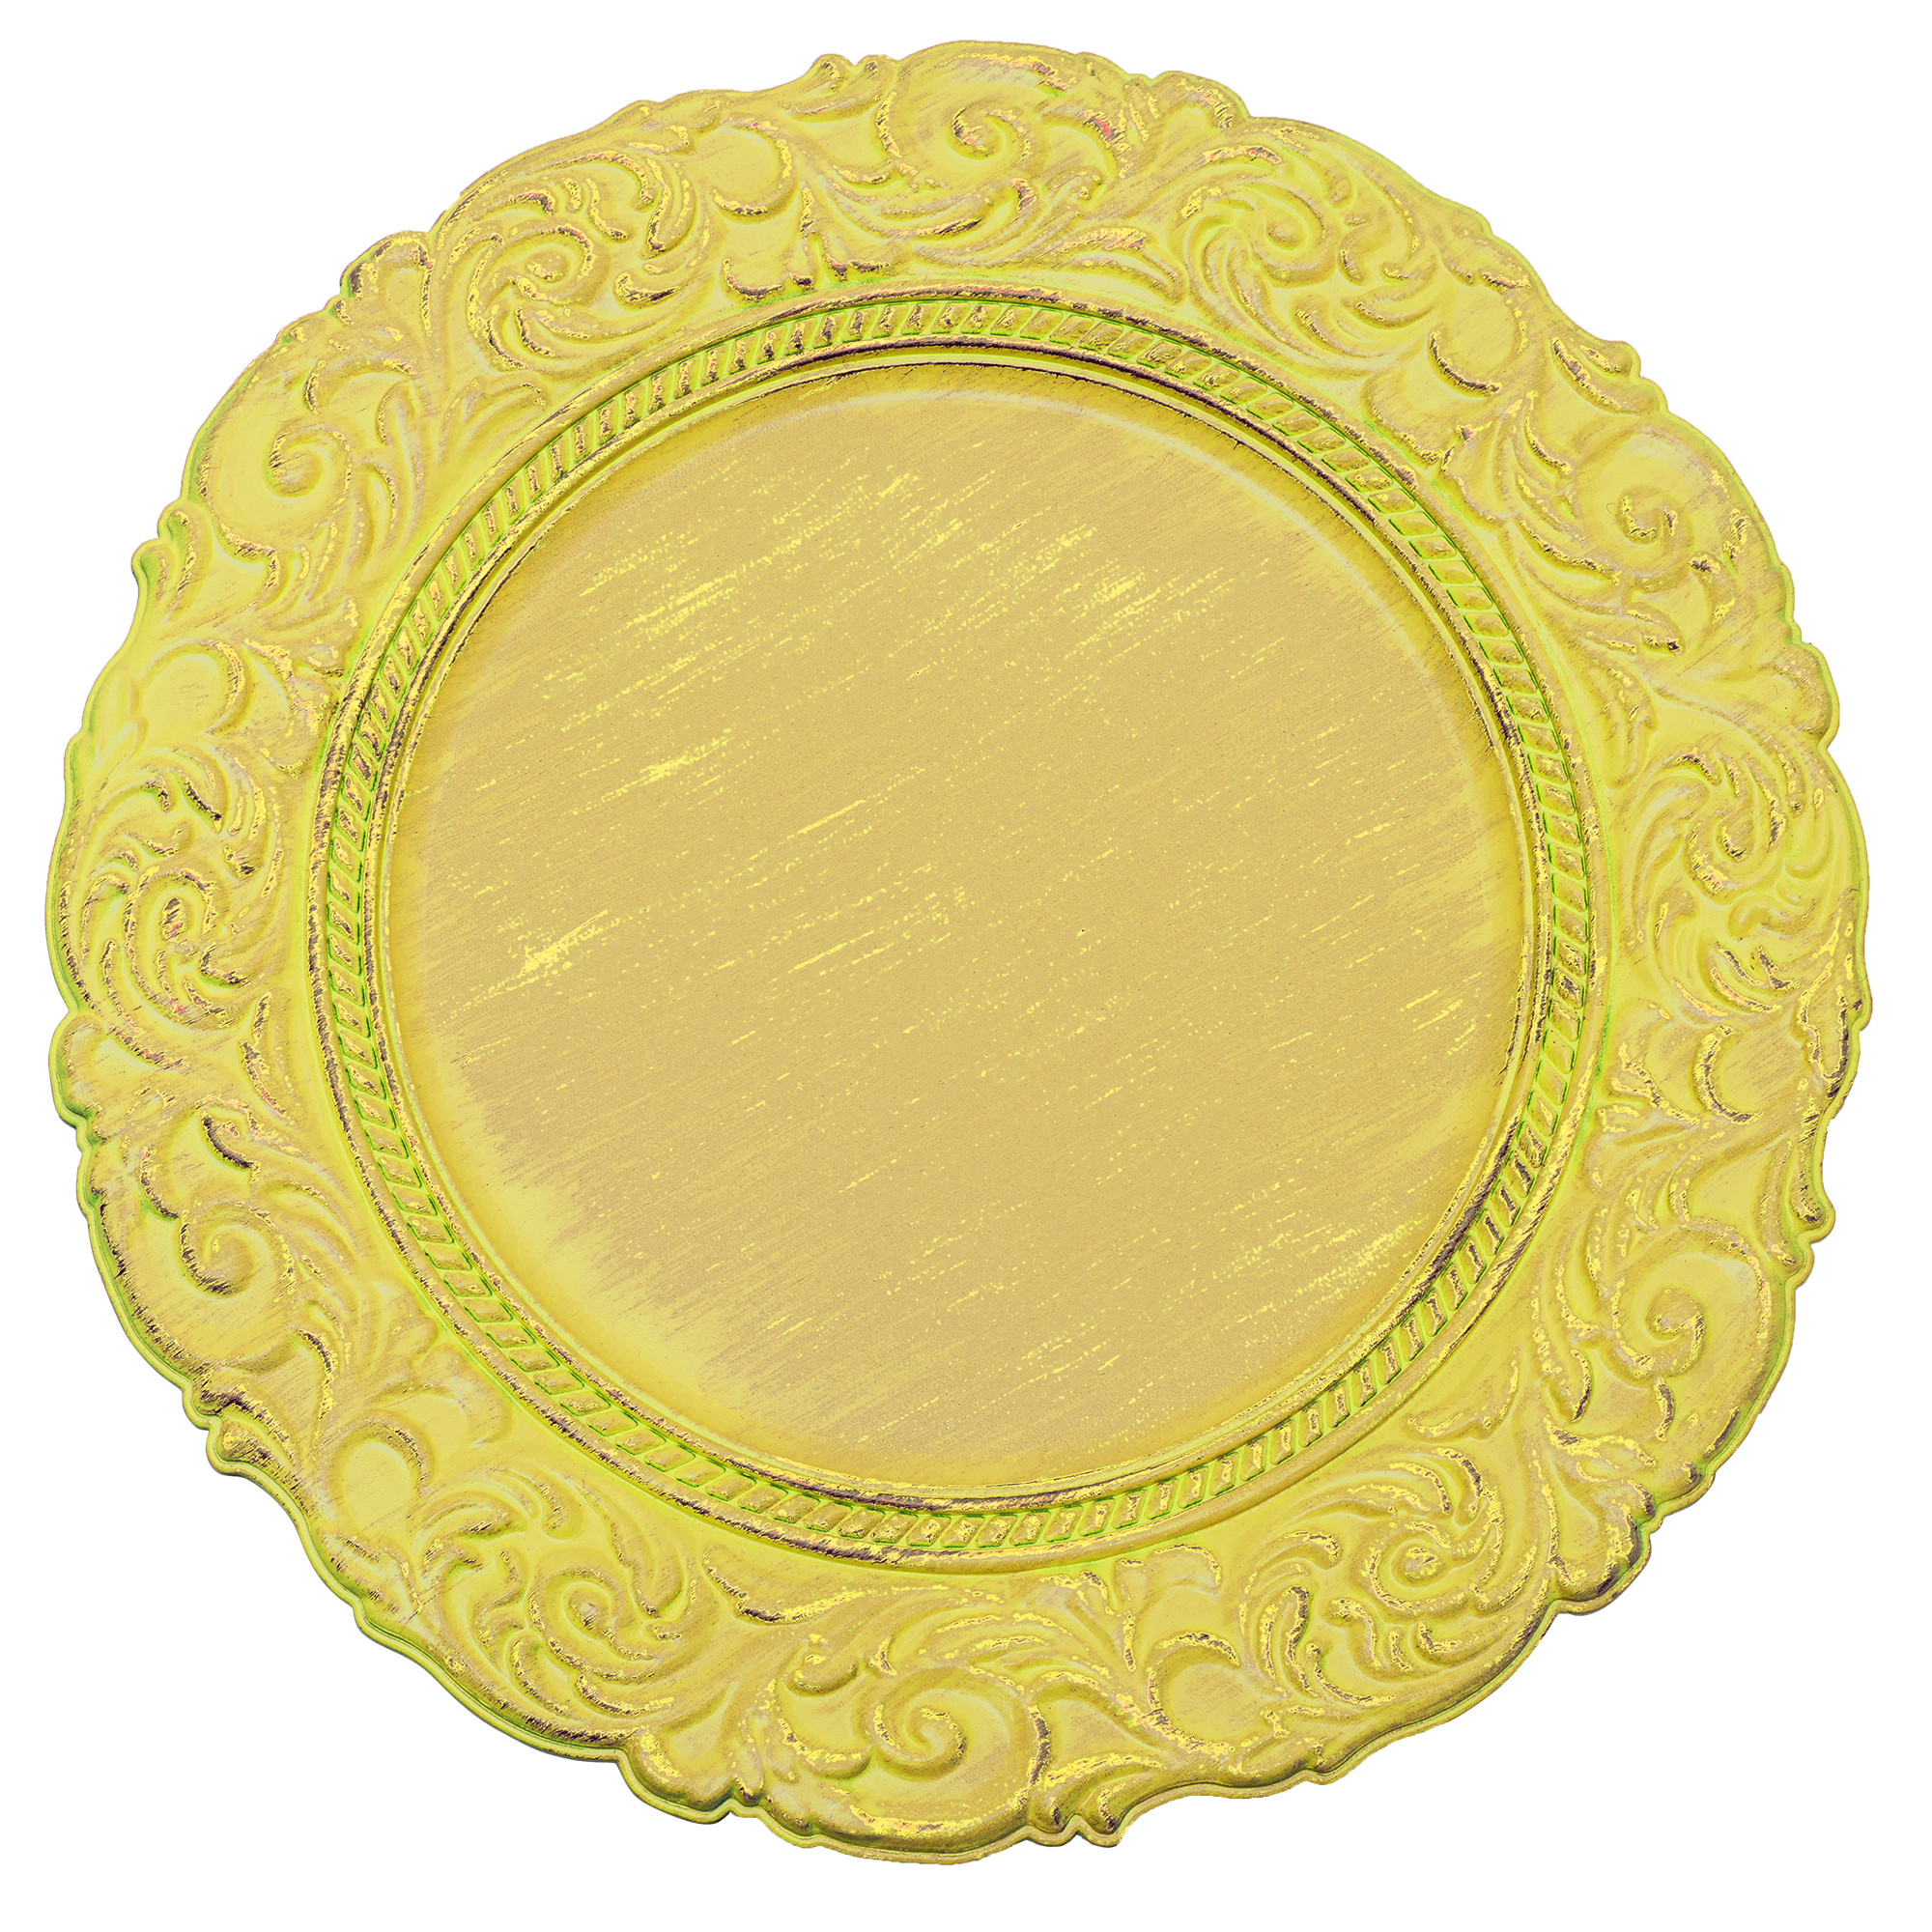 Antique Look Plastic Charger Plate 14" - Mustard